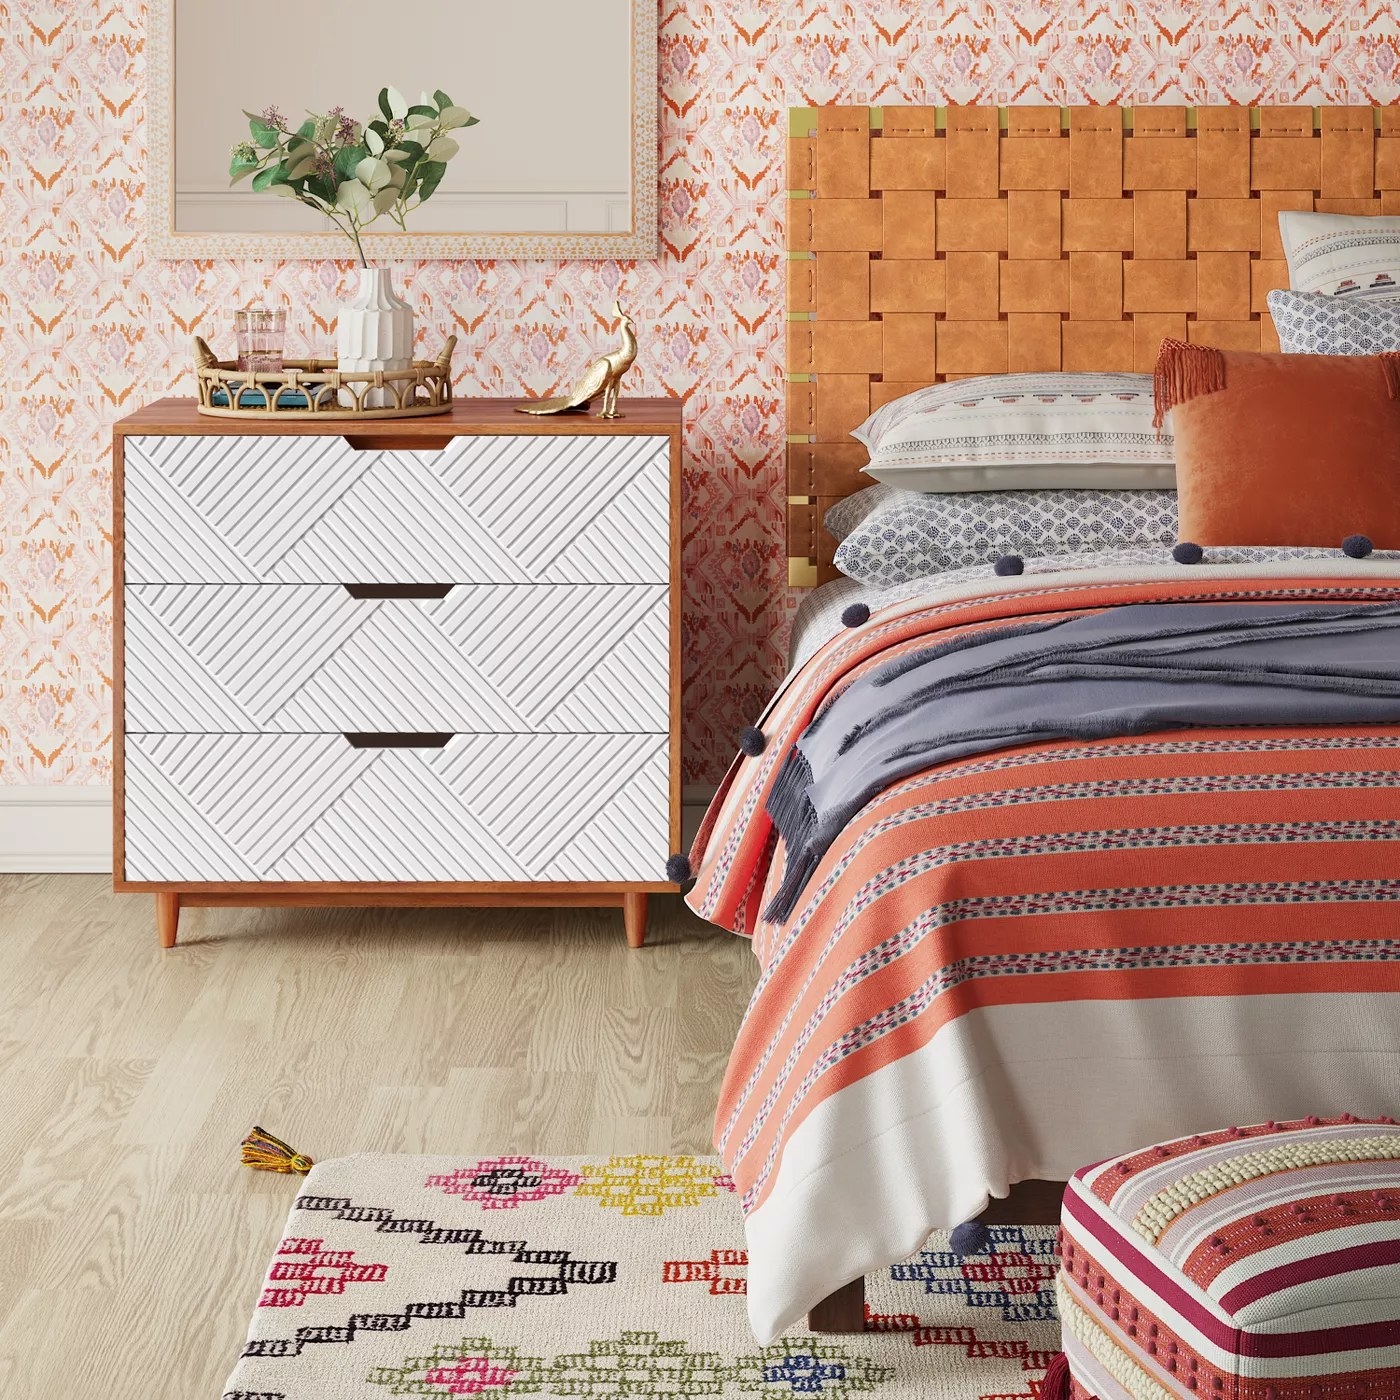 The dresser with geometrically textured white drawers next to a bed